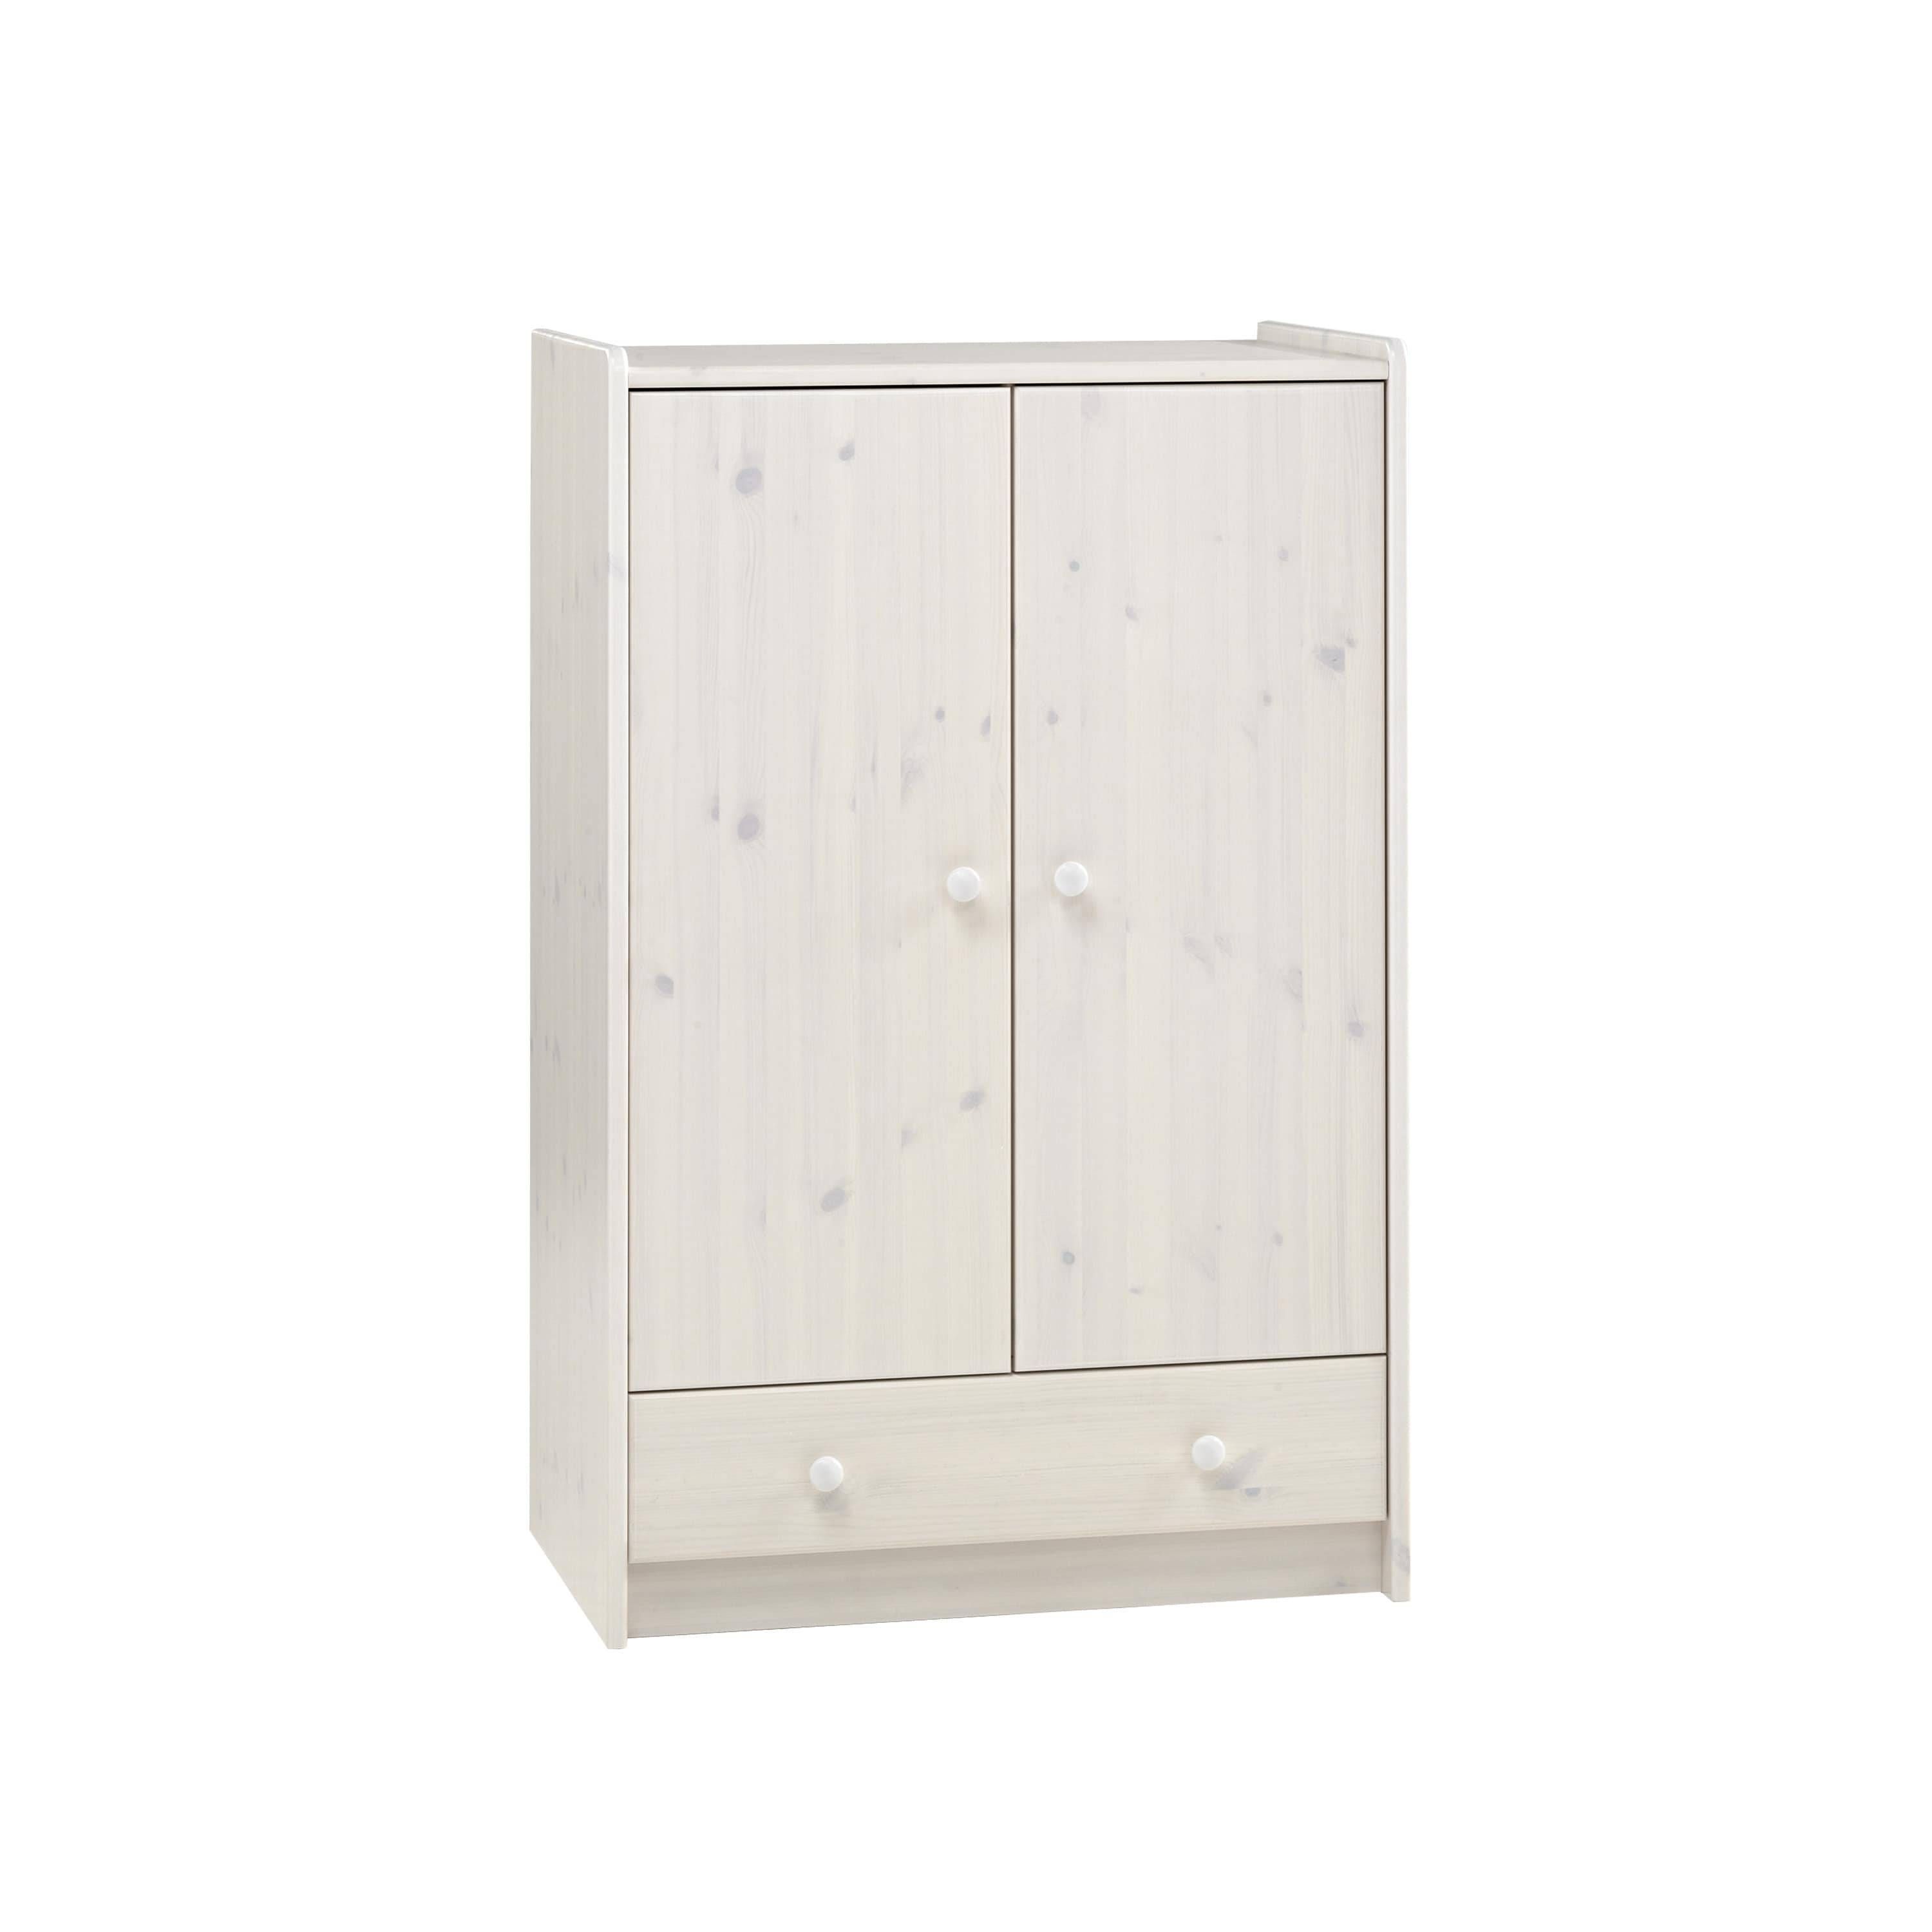 Popsicle Whitewash Low Wardrobe – Free Shipping Today – Overstock With Whitewash Wardrobes (View 6 of 15)